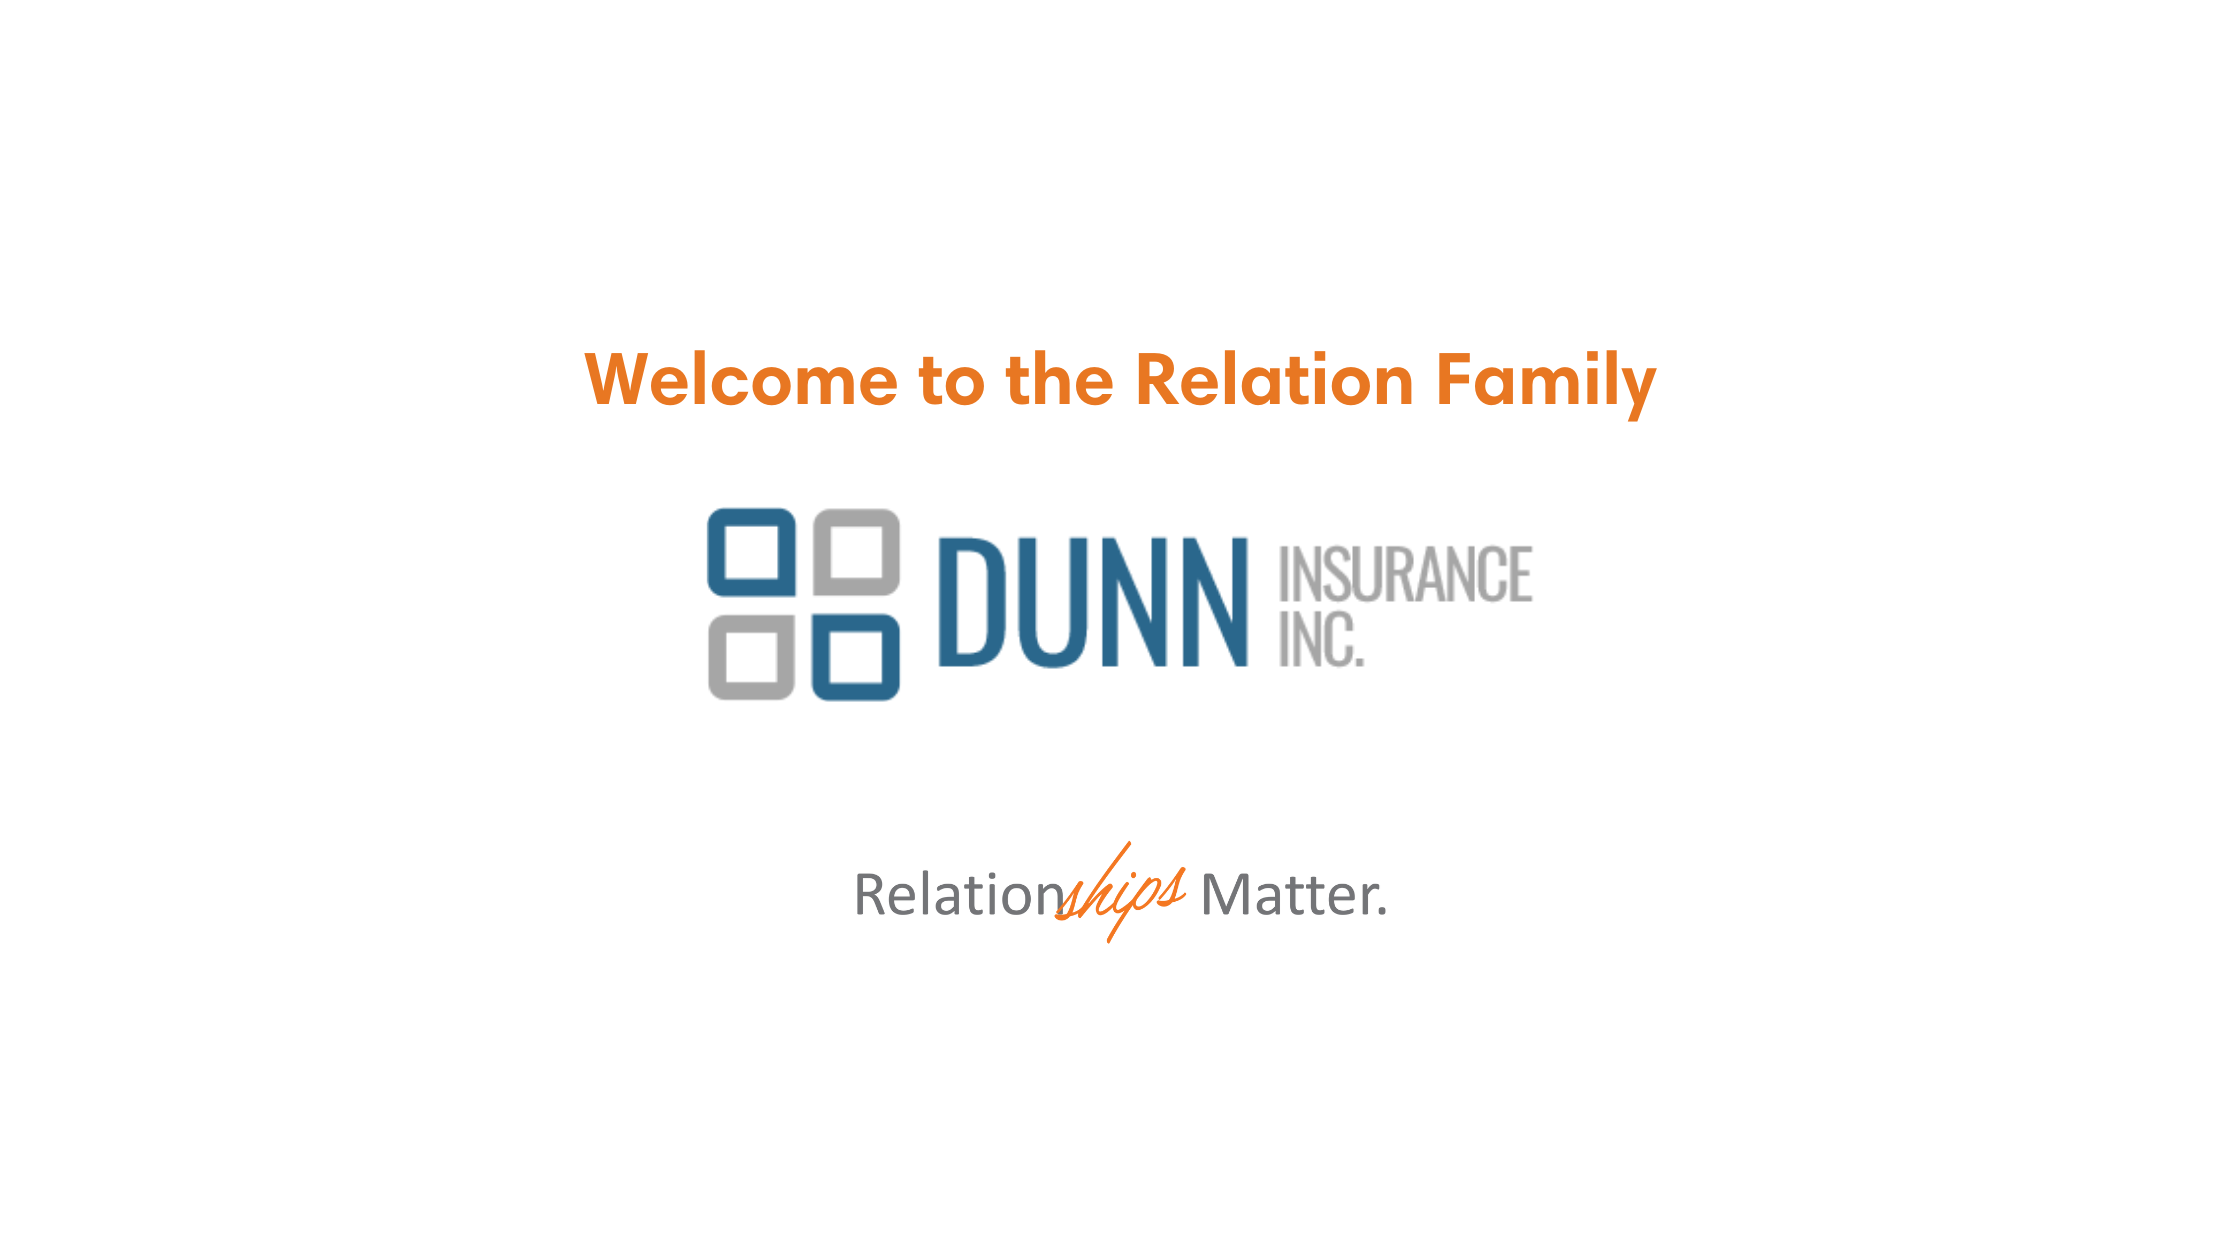 Relation Insurance Services Acquires the Assets of Dunn Insurance, Inc.